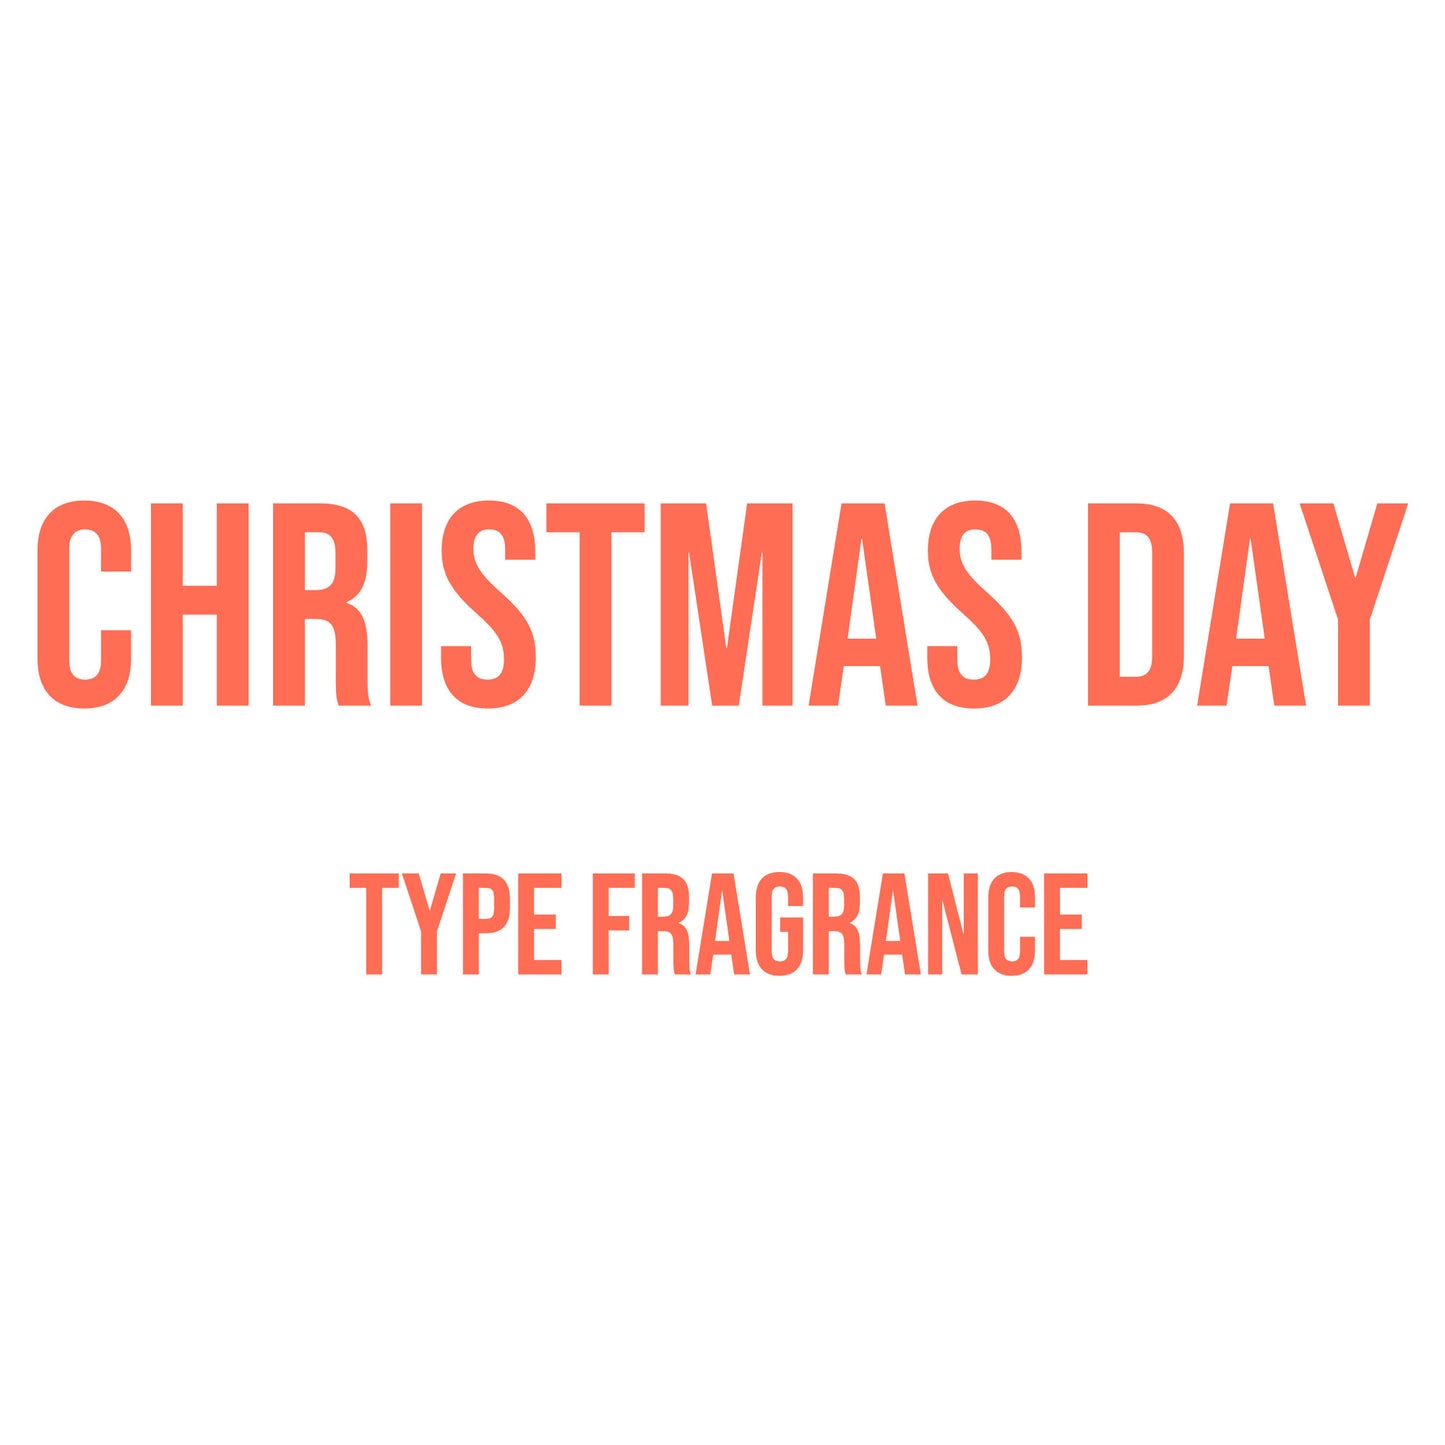 Christmas Day Type Fragrance